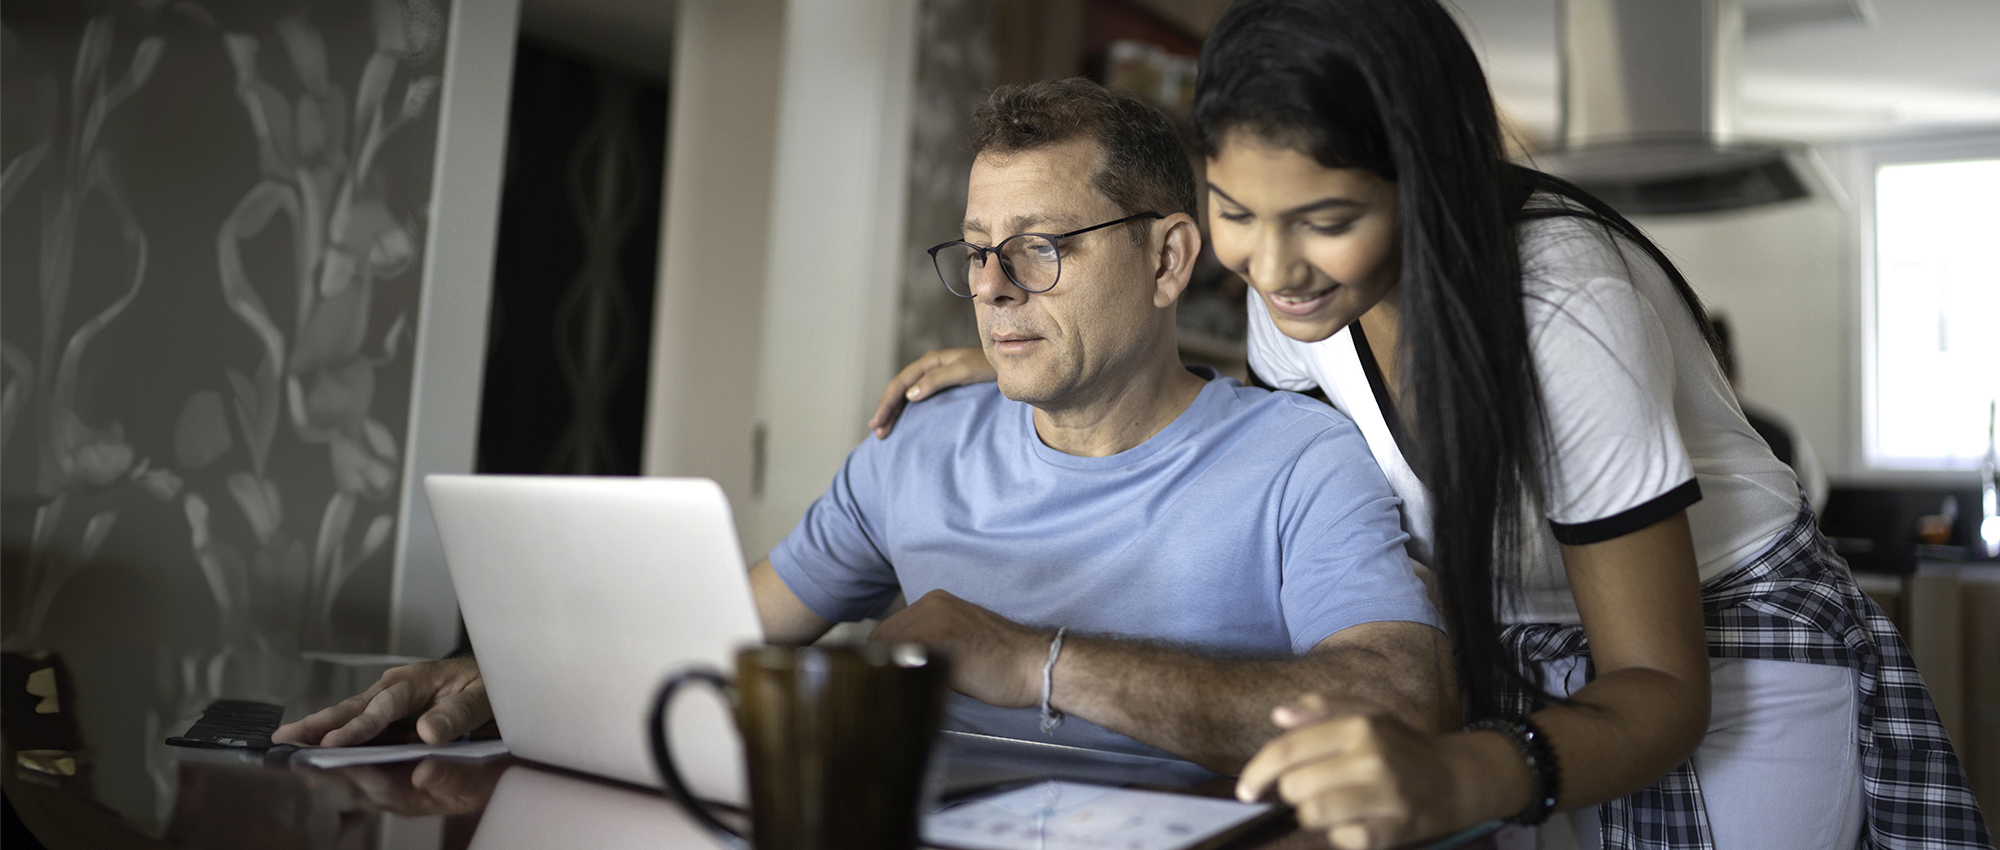 Image of student and parent looking at computer